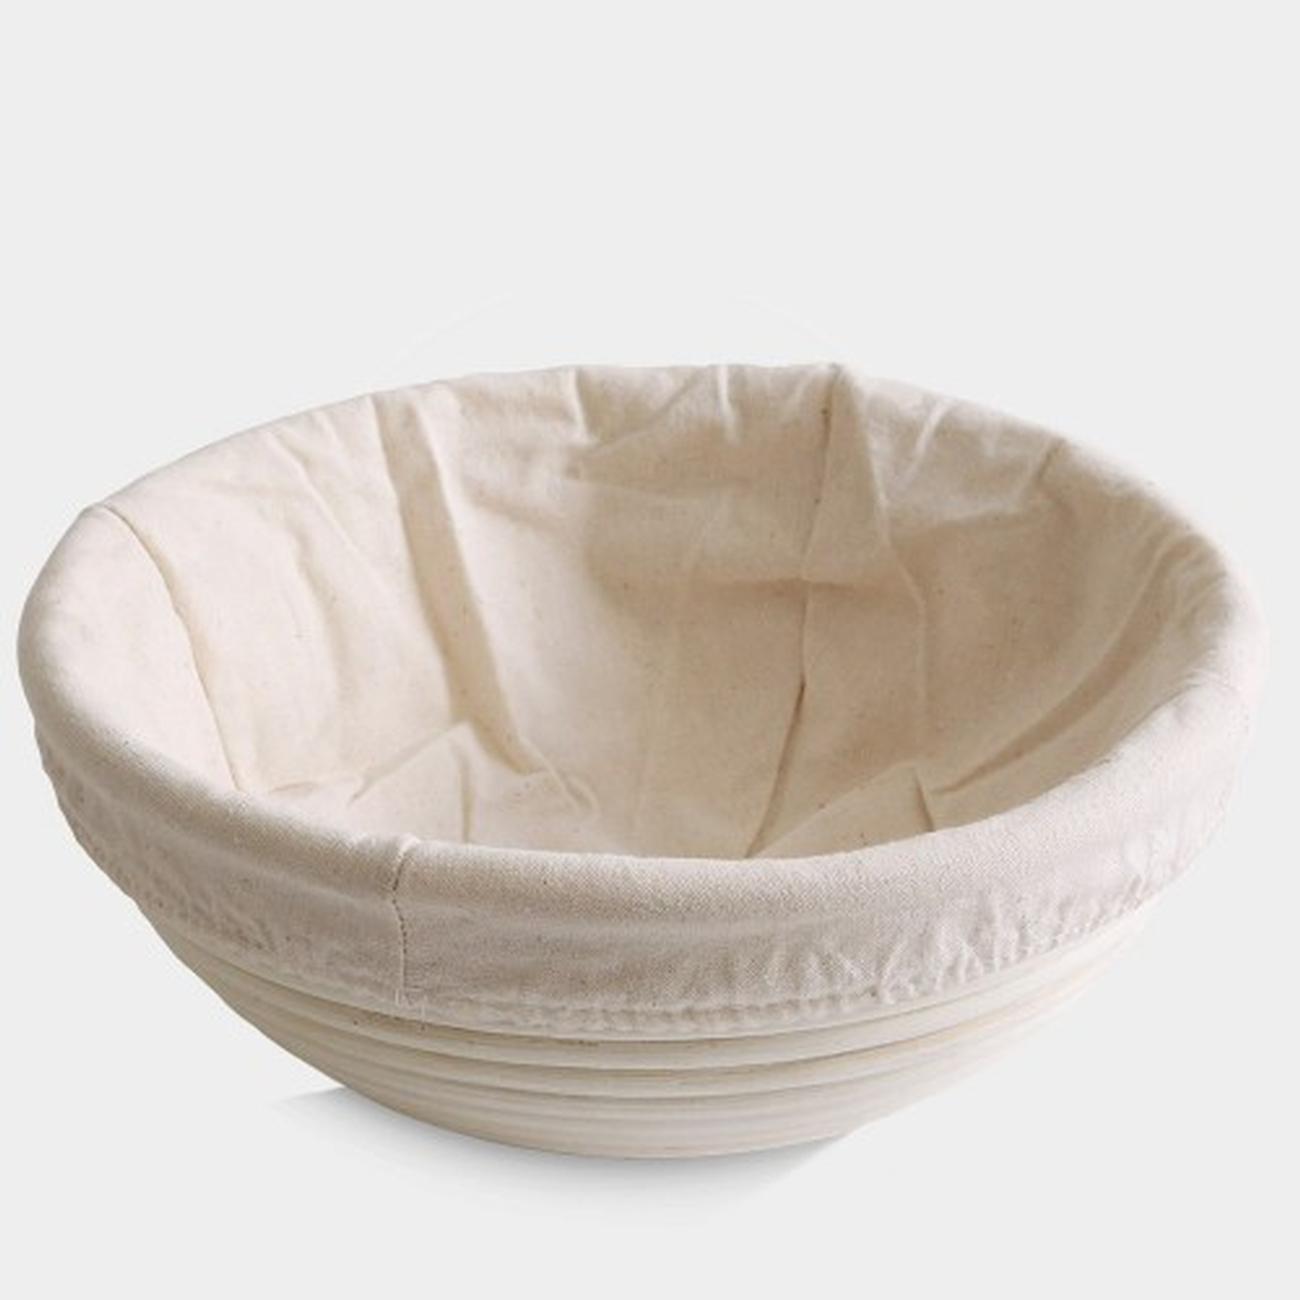 eddingtons-round-proofing-basket-linen-liners-2pc - Benneton Linen Liners Small Round Set of 2